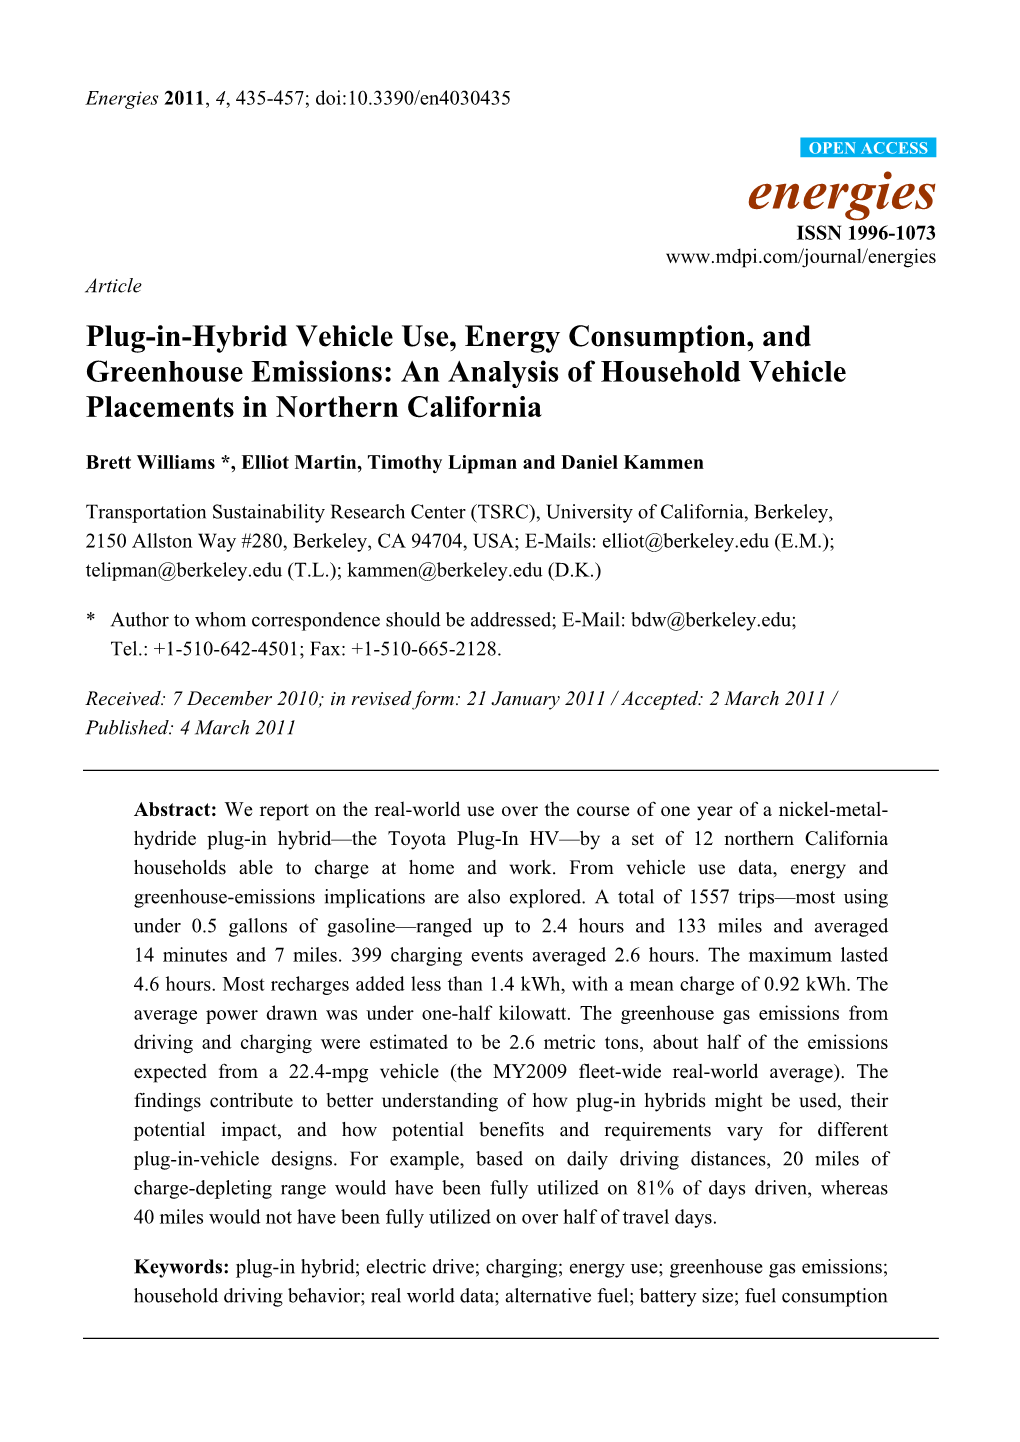 Plug-In-Hybrid Vehicle Use, Energy Consumption, and Greenhouse Emissions: an Analysis of Household Vehicle Placements in Northern California